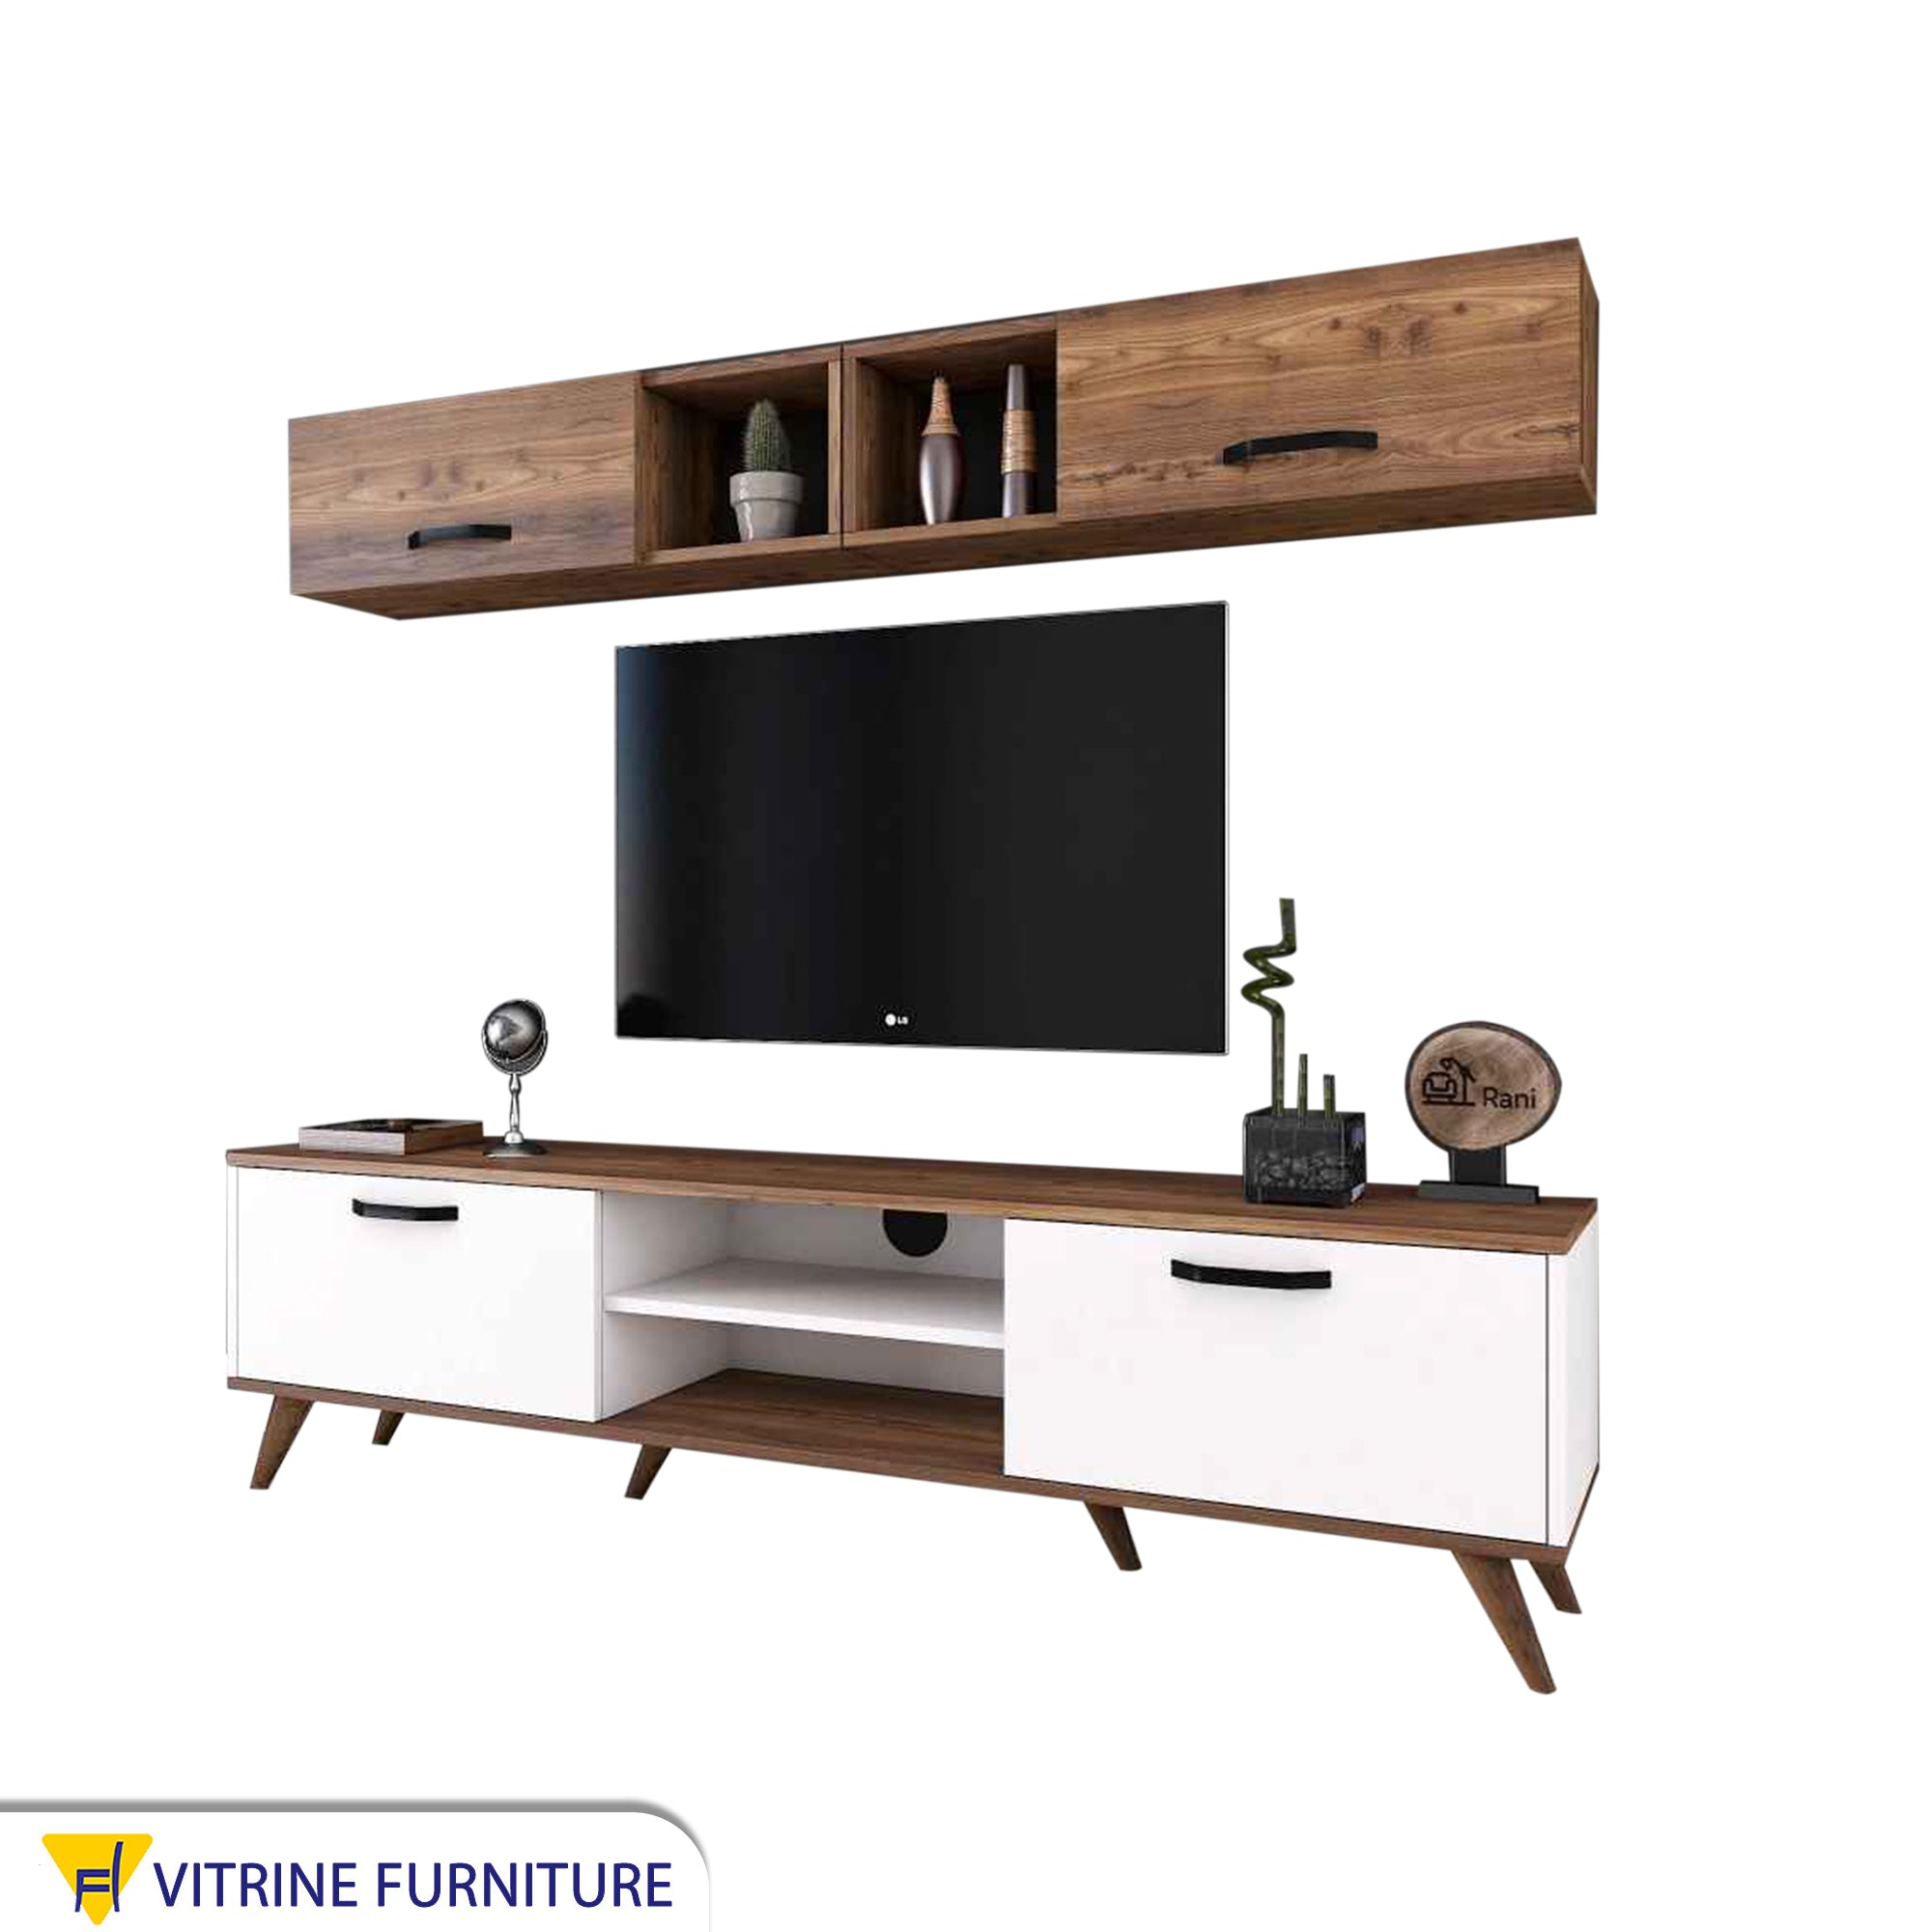 Two-unit TV cabinet